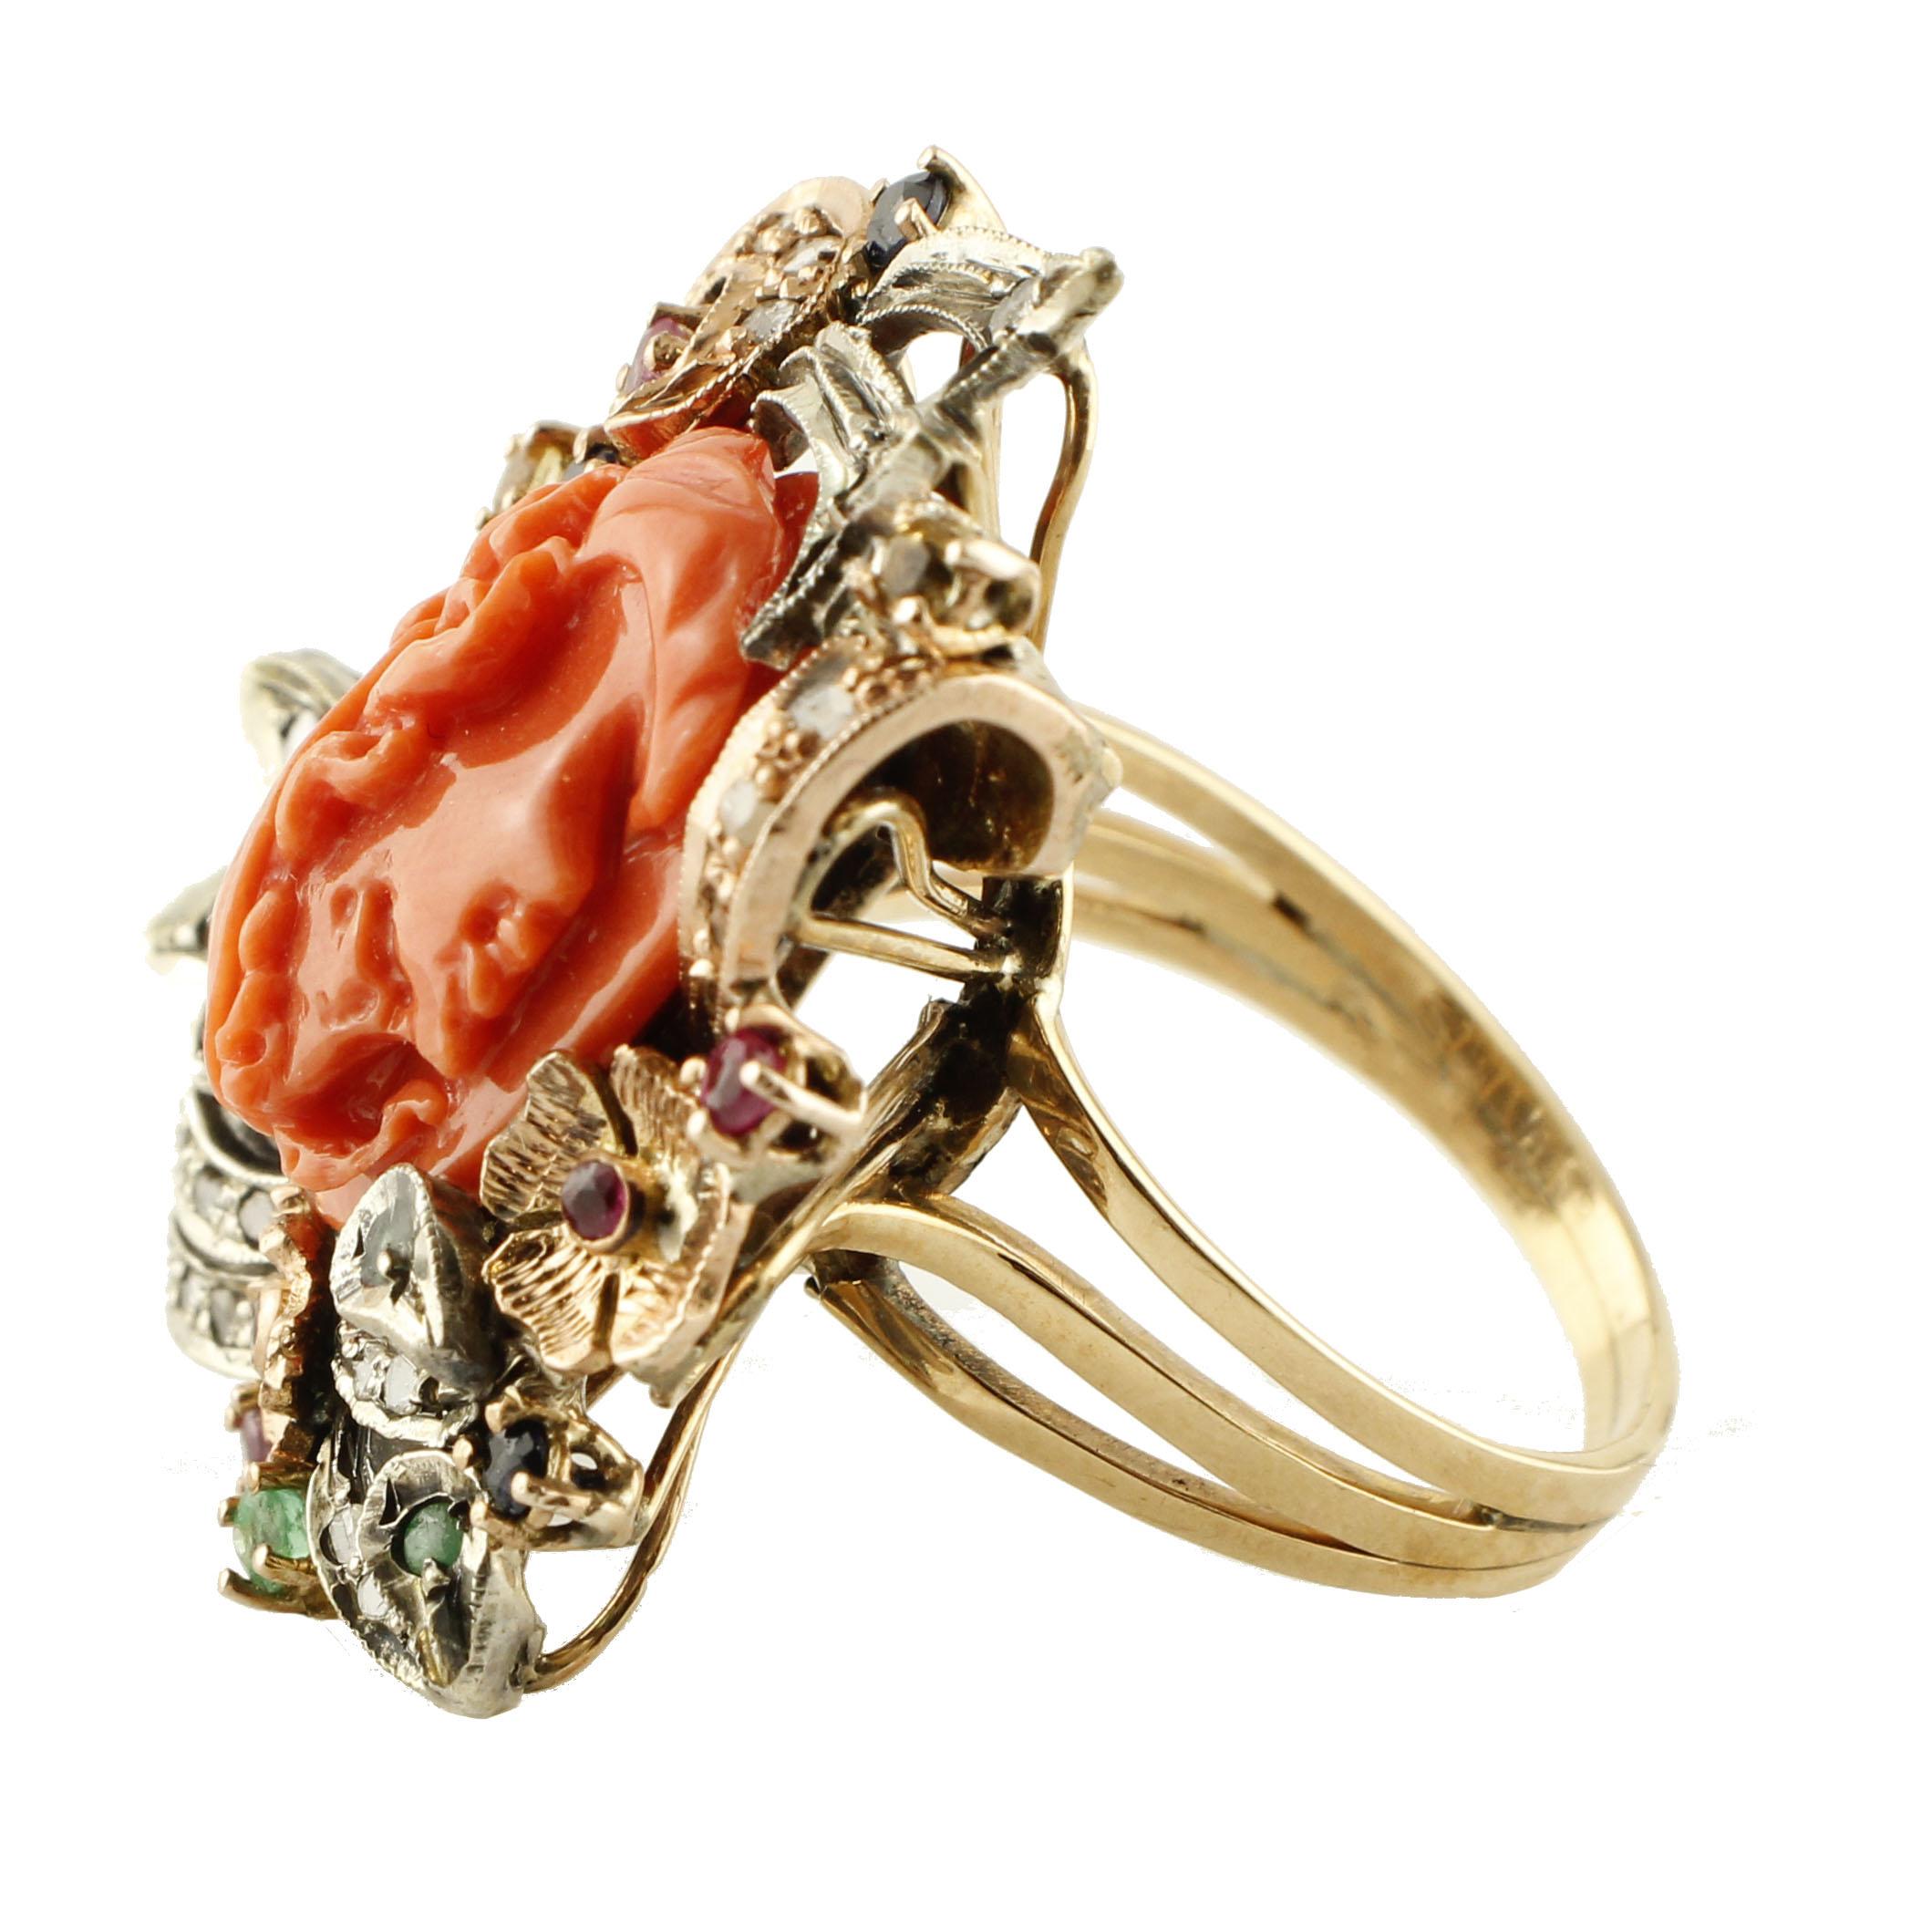 Retro Diamonds, Rubies, Emeralds, Sapphires, Coral Rose Gold and Silver Retrò Ring For Sale